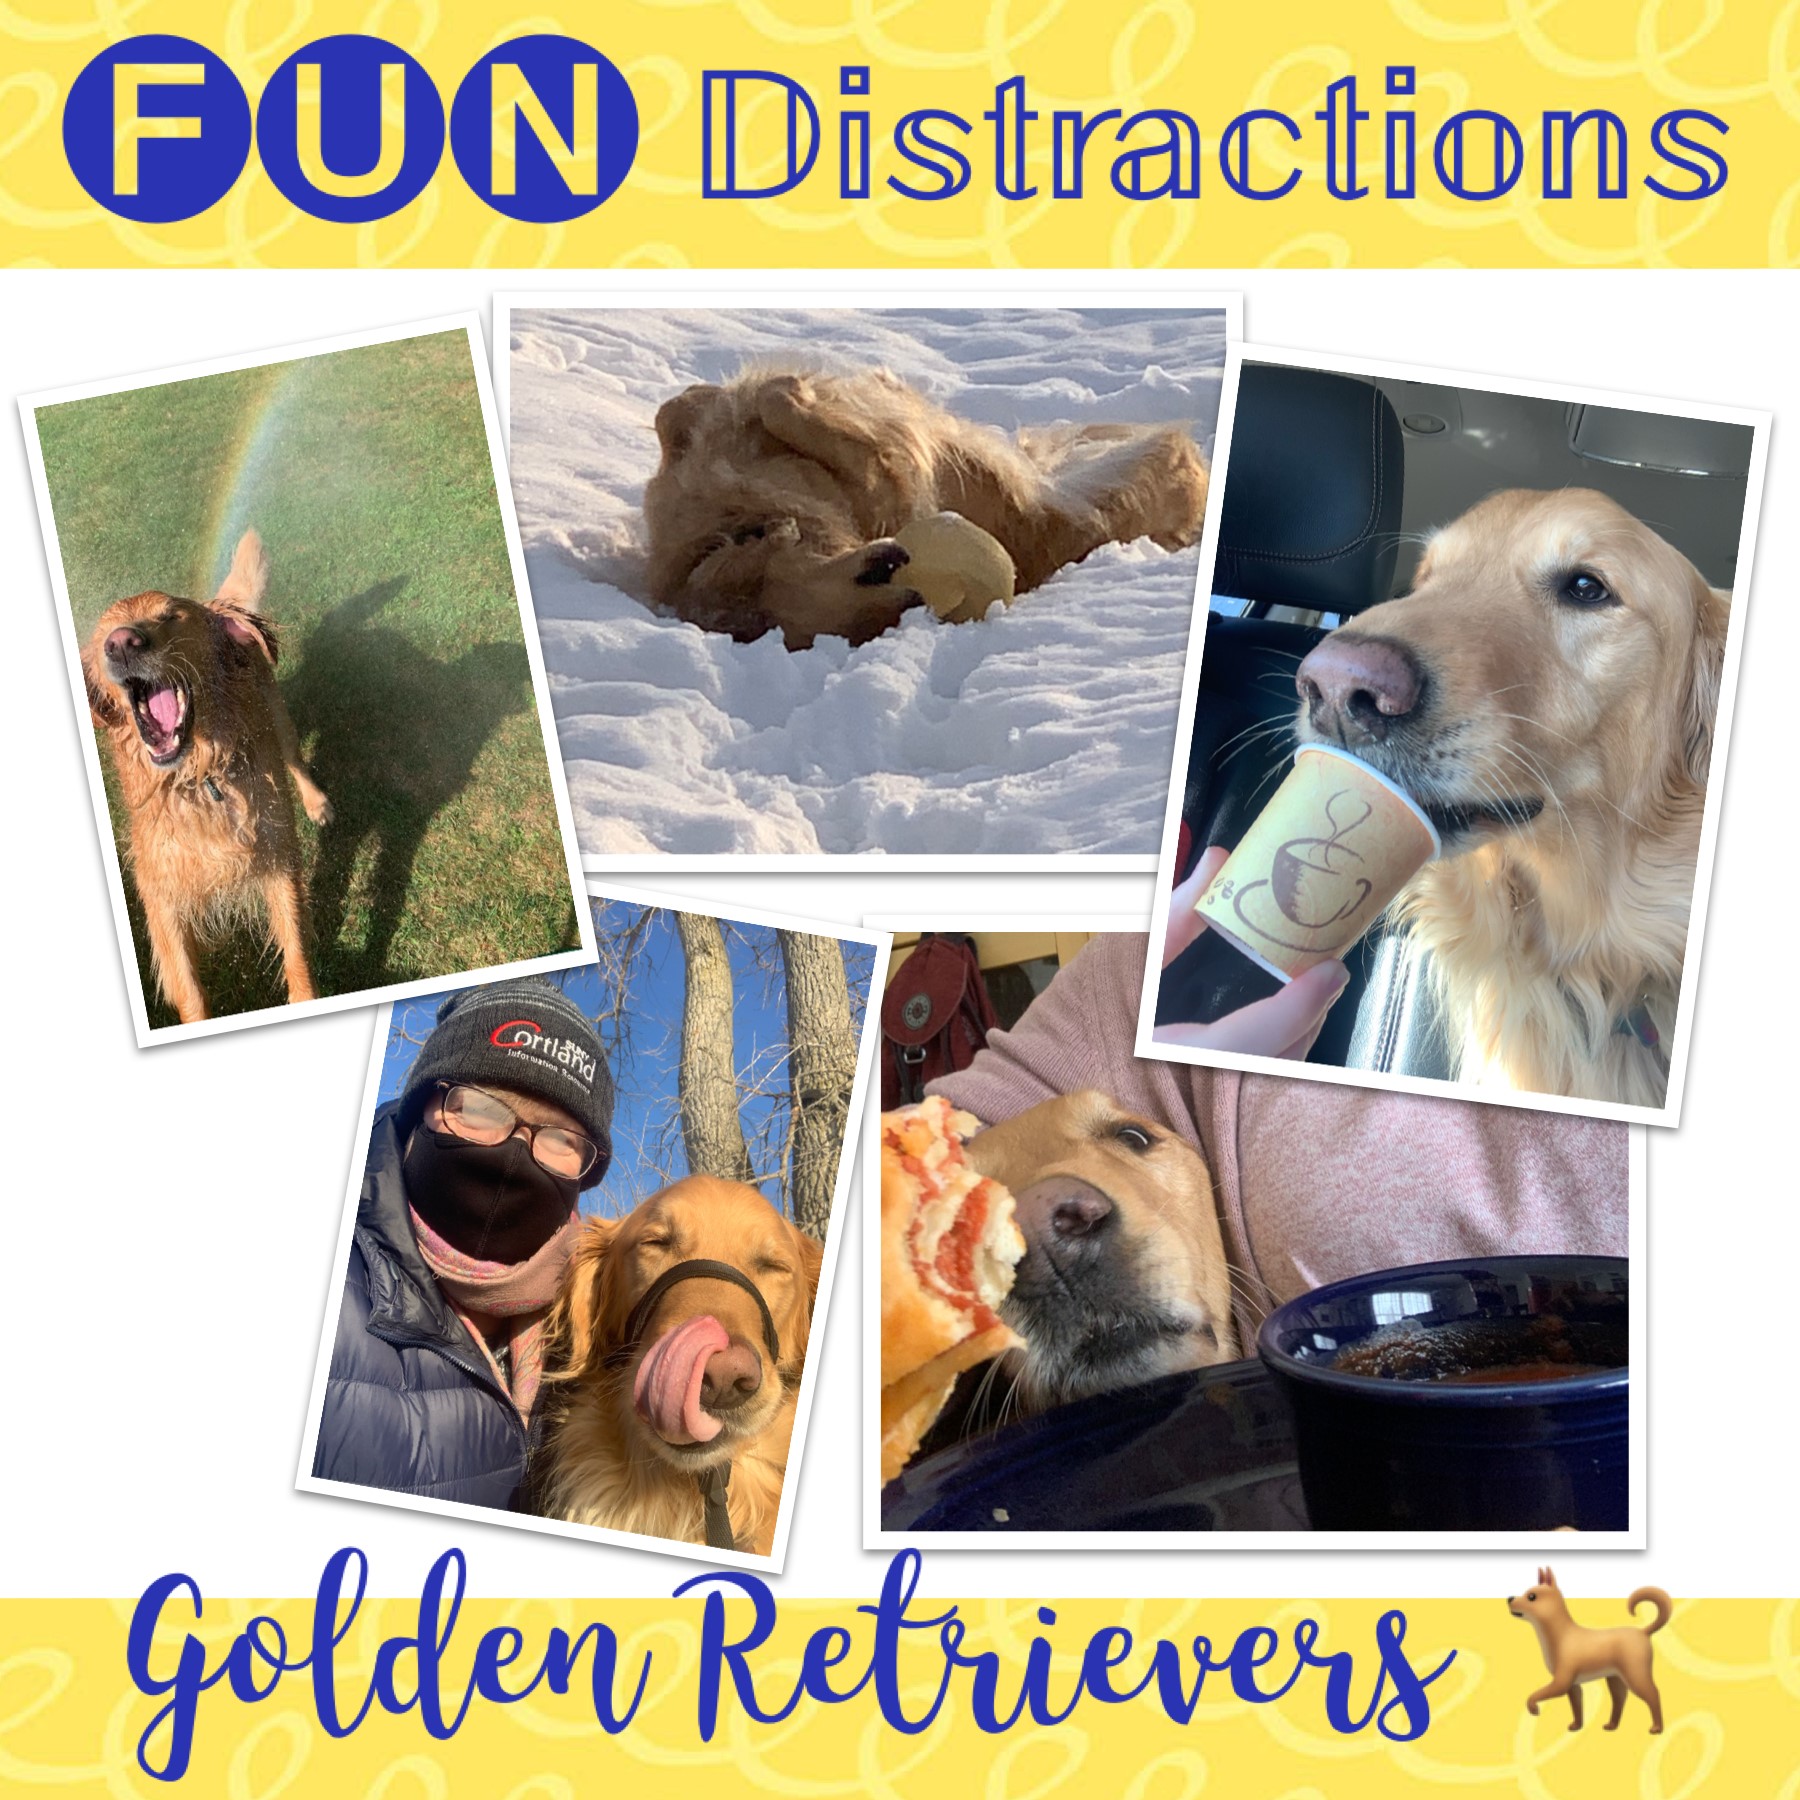 A number of images of a golden retriever